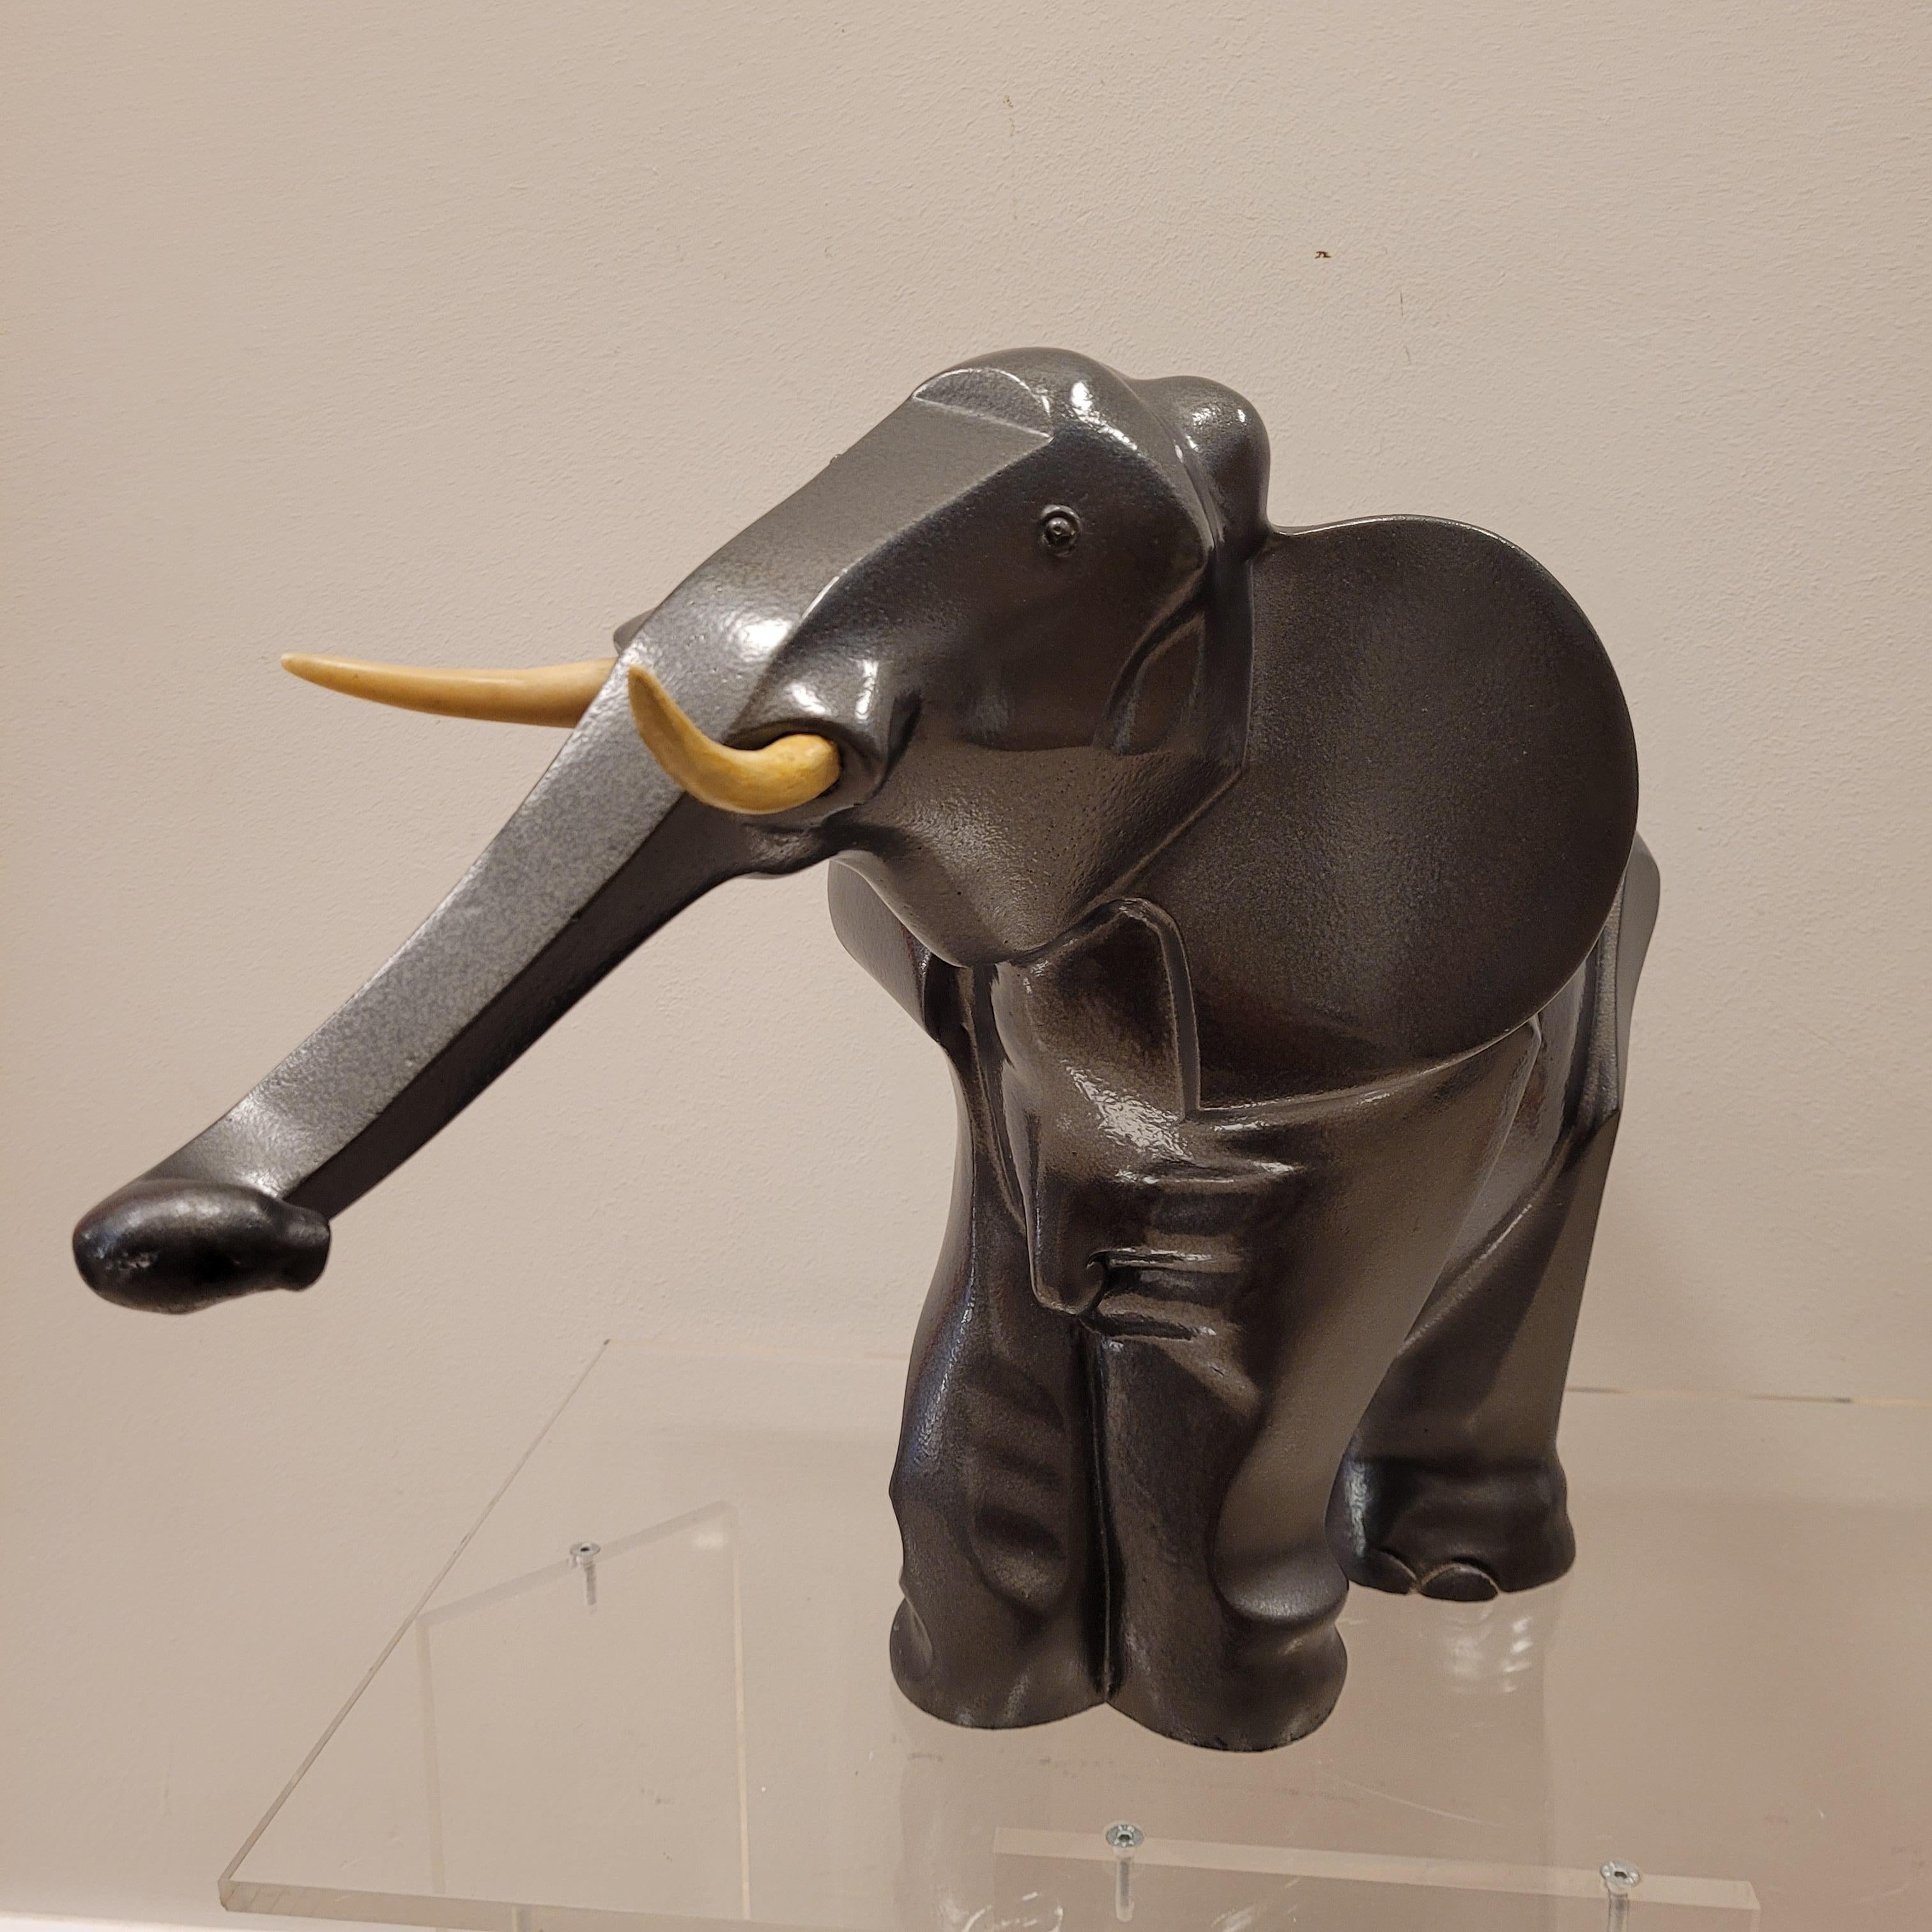 Gorgeous Art Deco elephant made of babbitt, original metal used at the time, beginning of the 20th century, following the style of Irénée Rochard (1906 - 1984). With round and faceted shapes, this sculpture is born from the polygonal approaches of